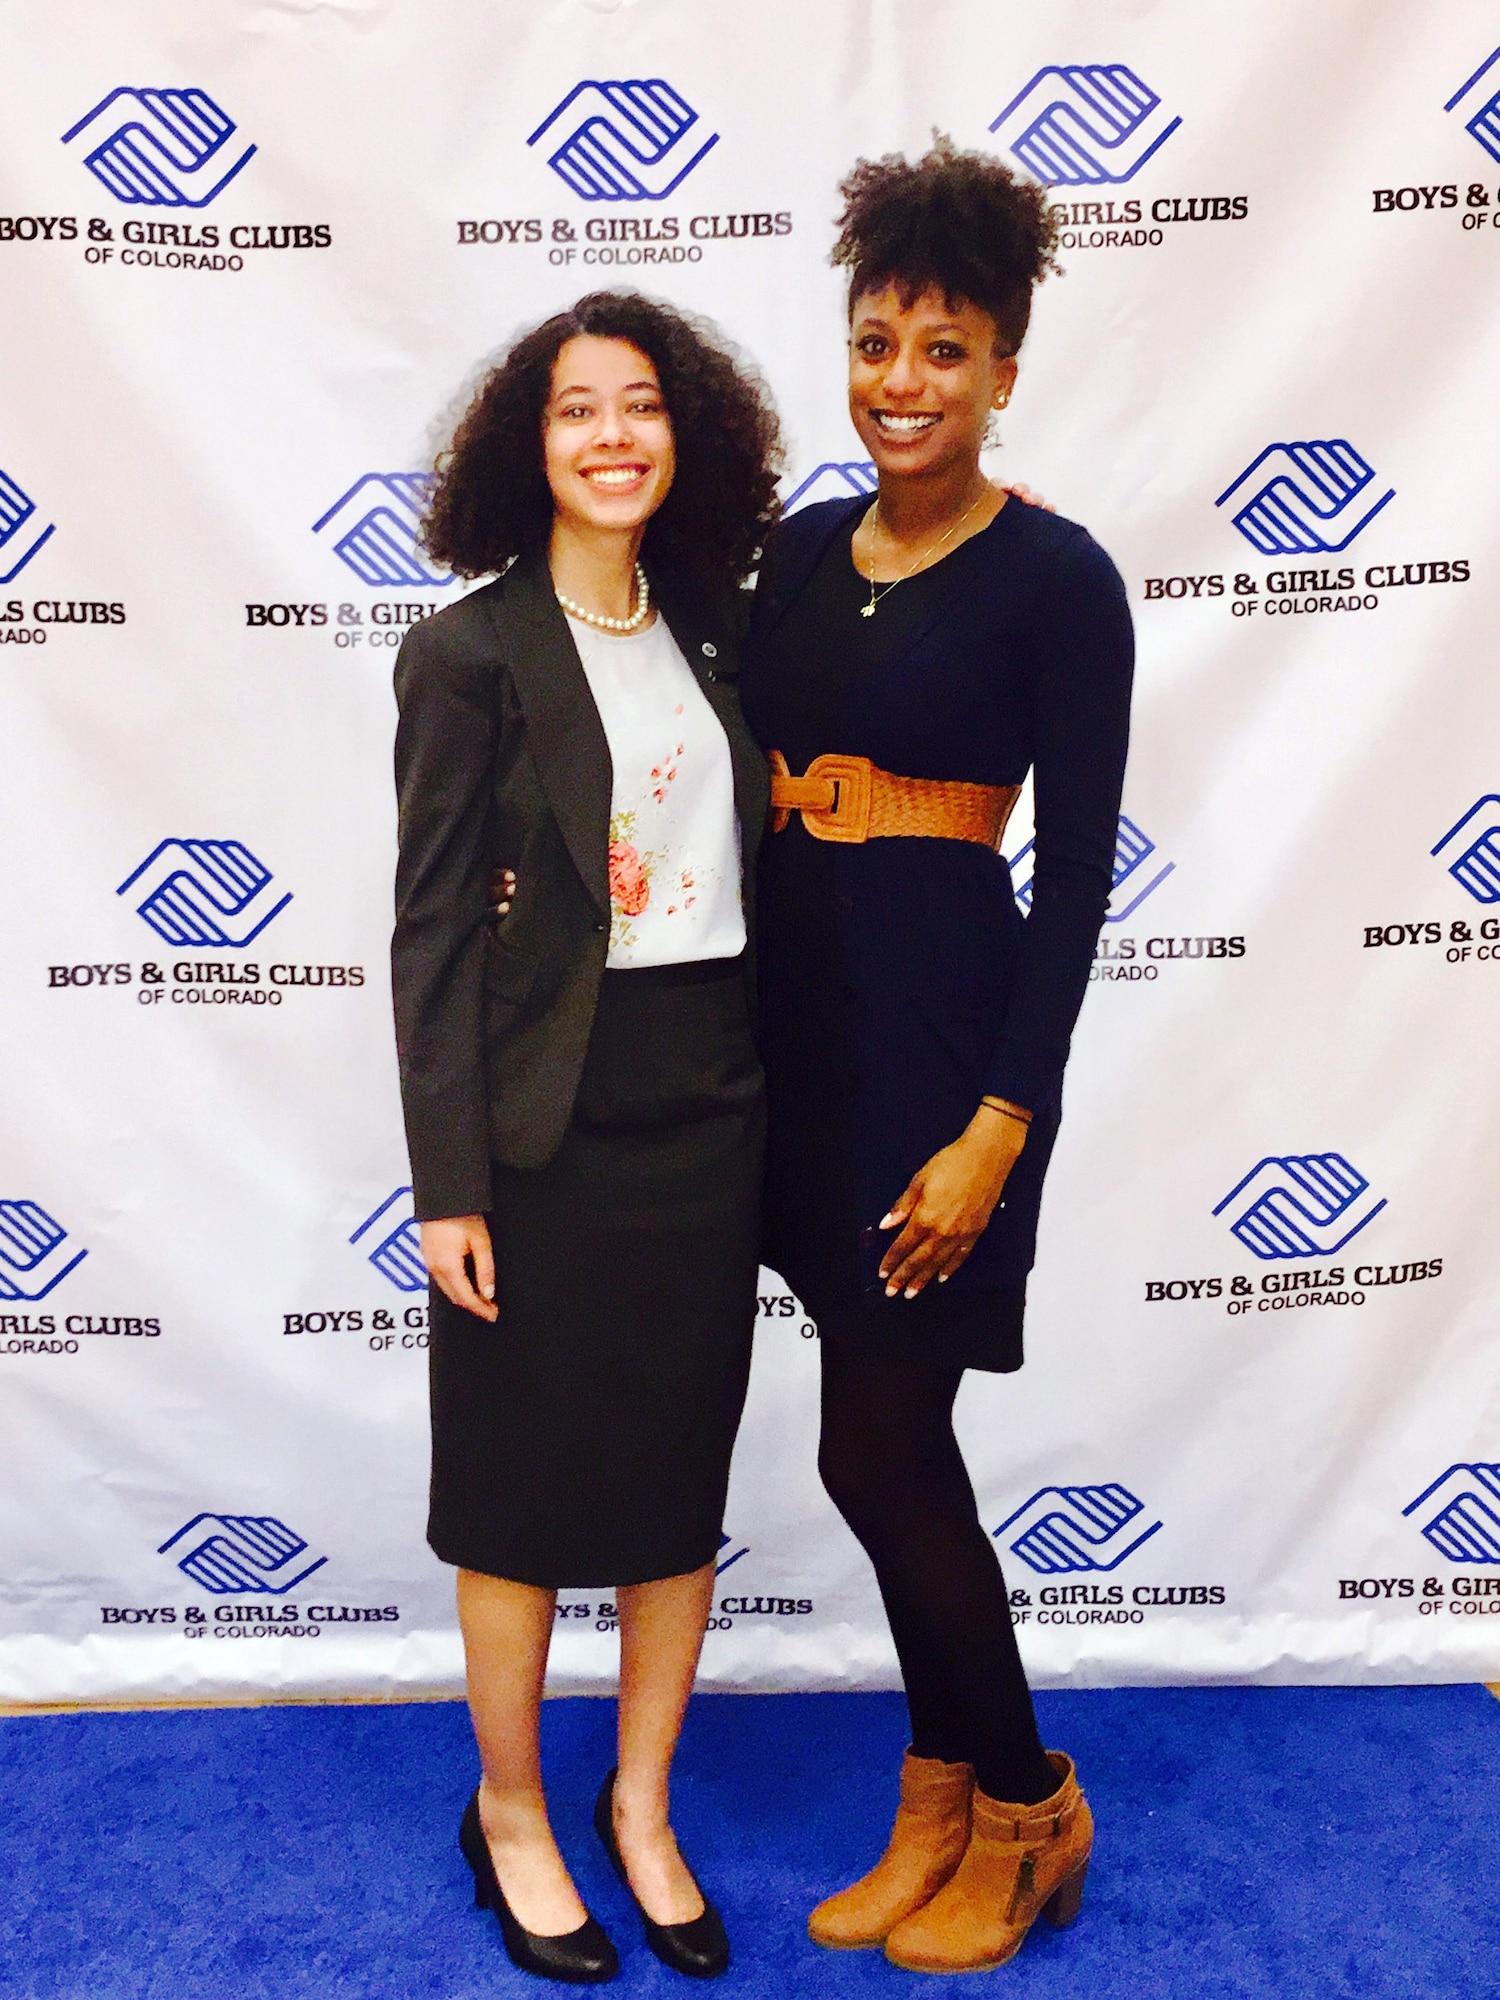 Danielle Wright, Colorado Military Youth of the Year, poses with Autumn Washington, 460th Force Support Squadron child and youth program specialist, March 28, 2017, at the National Youth of the Year Celebration in Denver. Youth of the Year is a national Boys & Girls Club program, and was established to recognize and honor the nation’s most inspirational teens. (Courtesy photo)